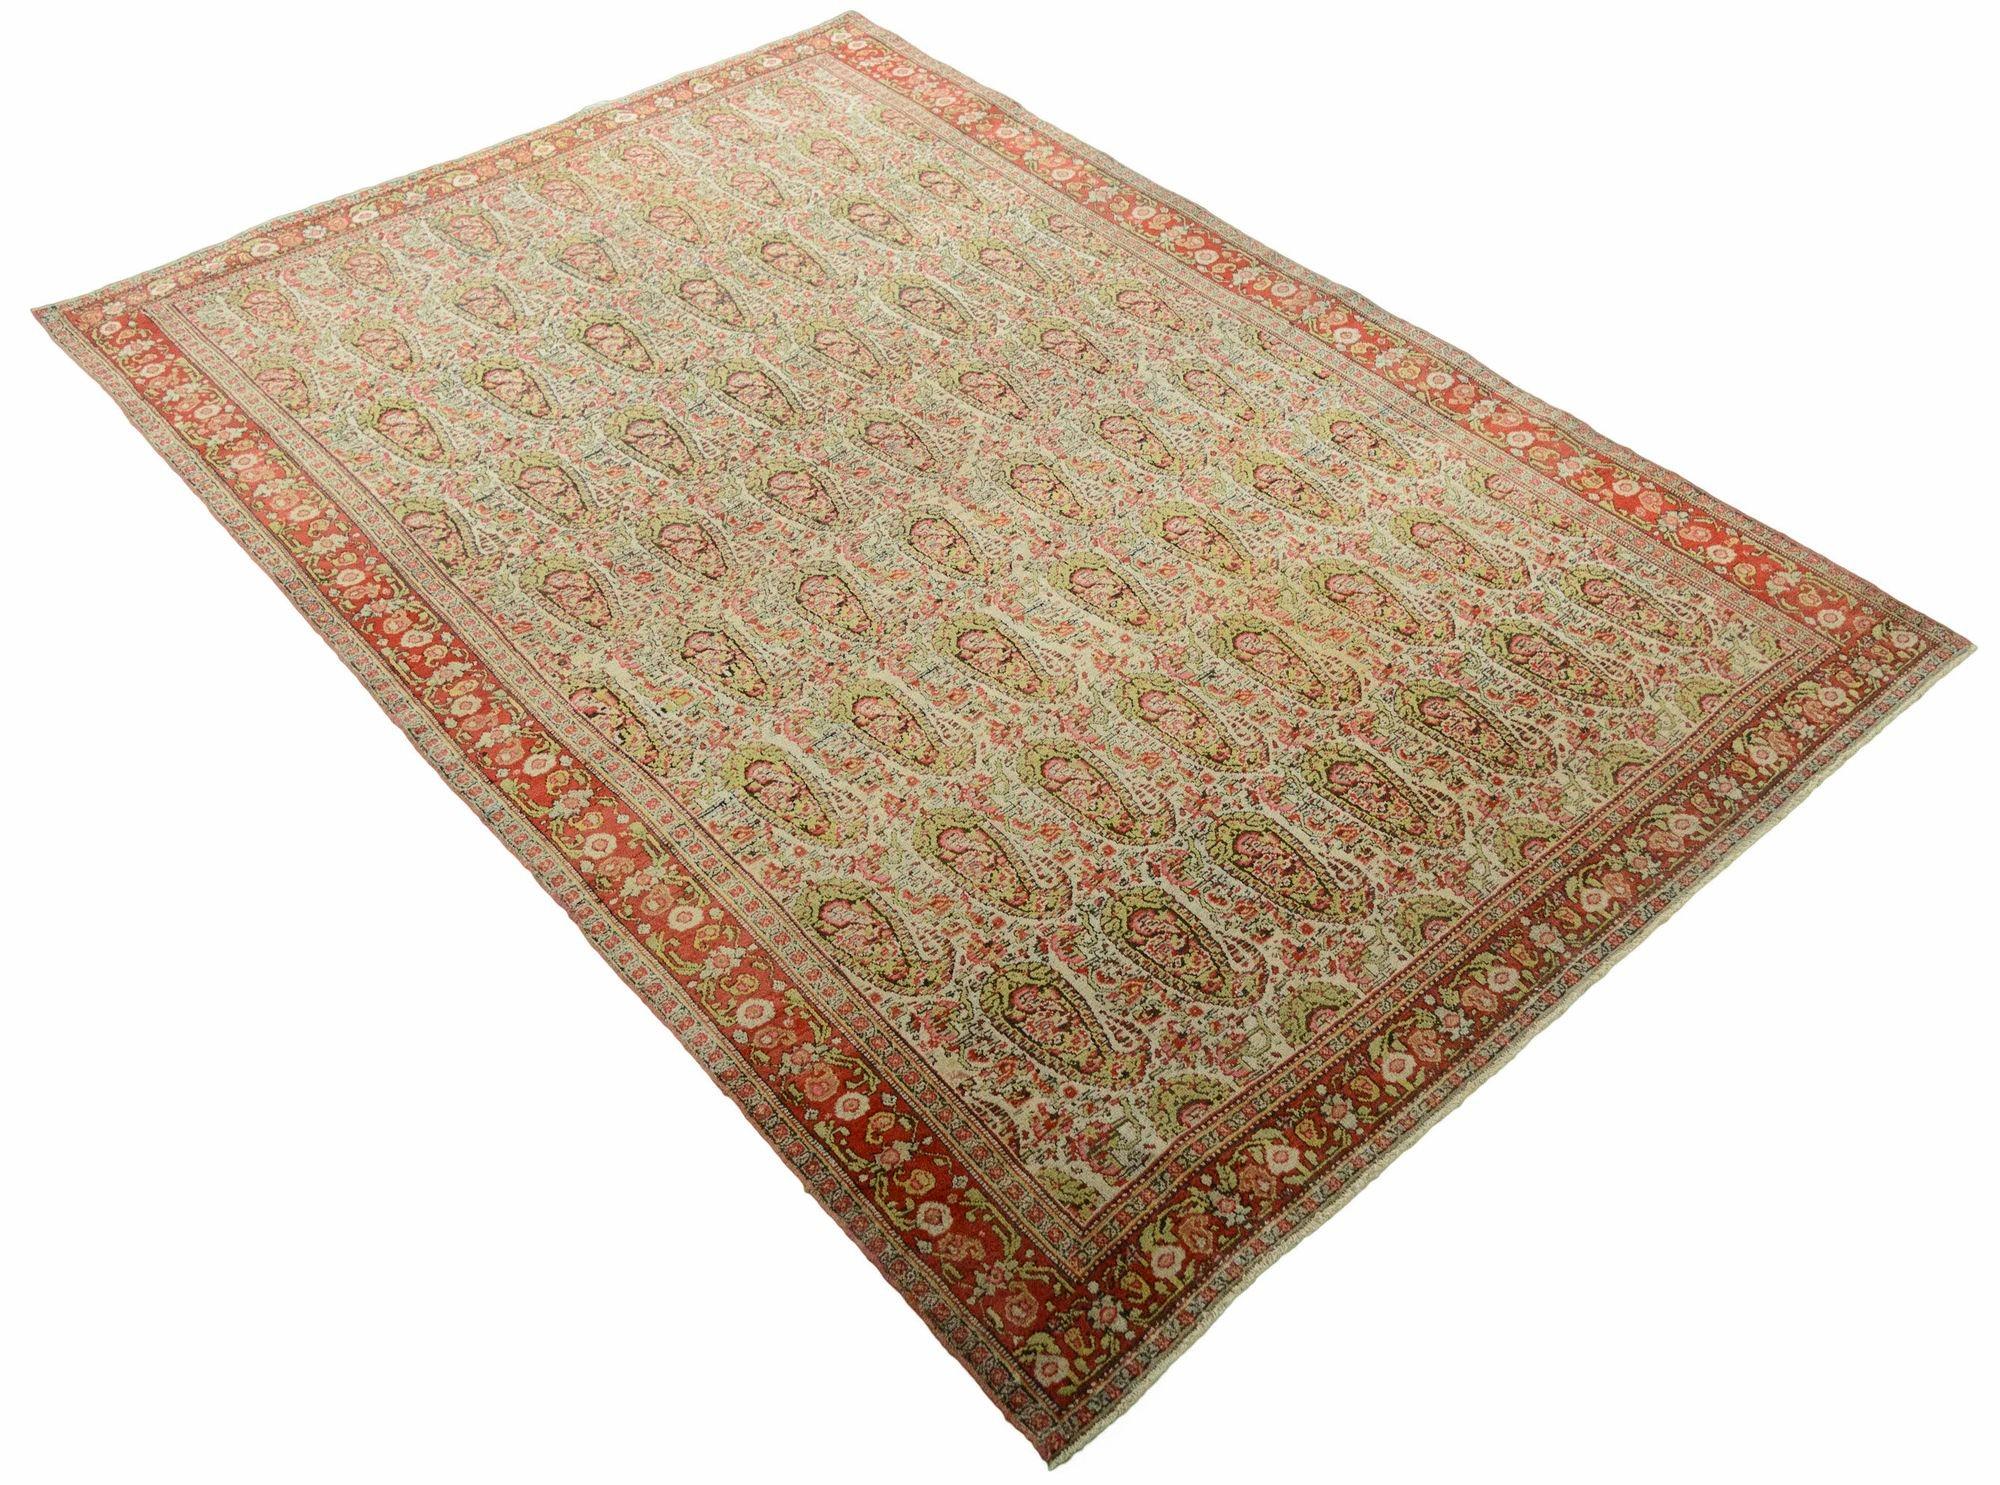 Early 20th Century Antique Senneh Rug 2.02m x 1.36m For Sale